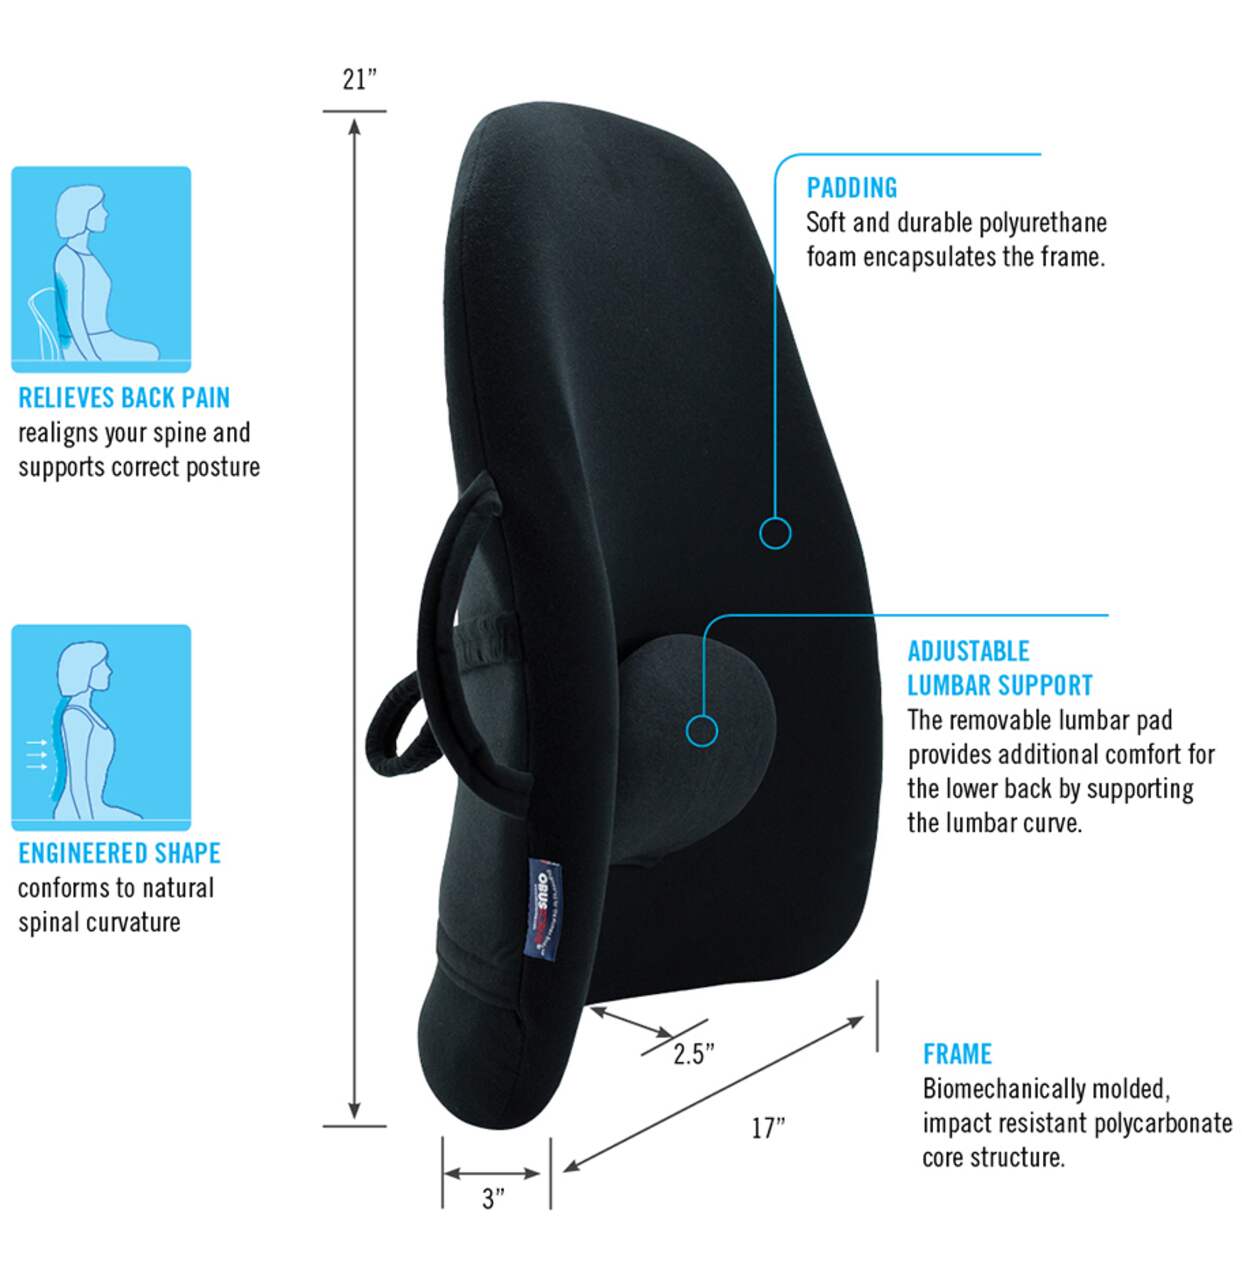 https://media-www.canadiantire.ca/product/living/personal-garment-care/personal-care/0746324/obusforme-lowback-backrest-support-a8664069-245e-48e3-81bc-0a1b87212477.png?imdensity=1&imwidth=1244&impolicy=mZoom